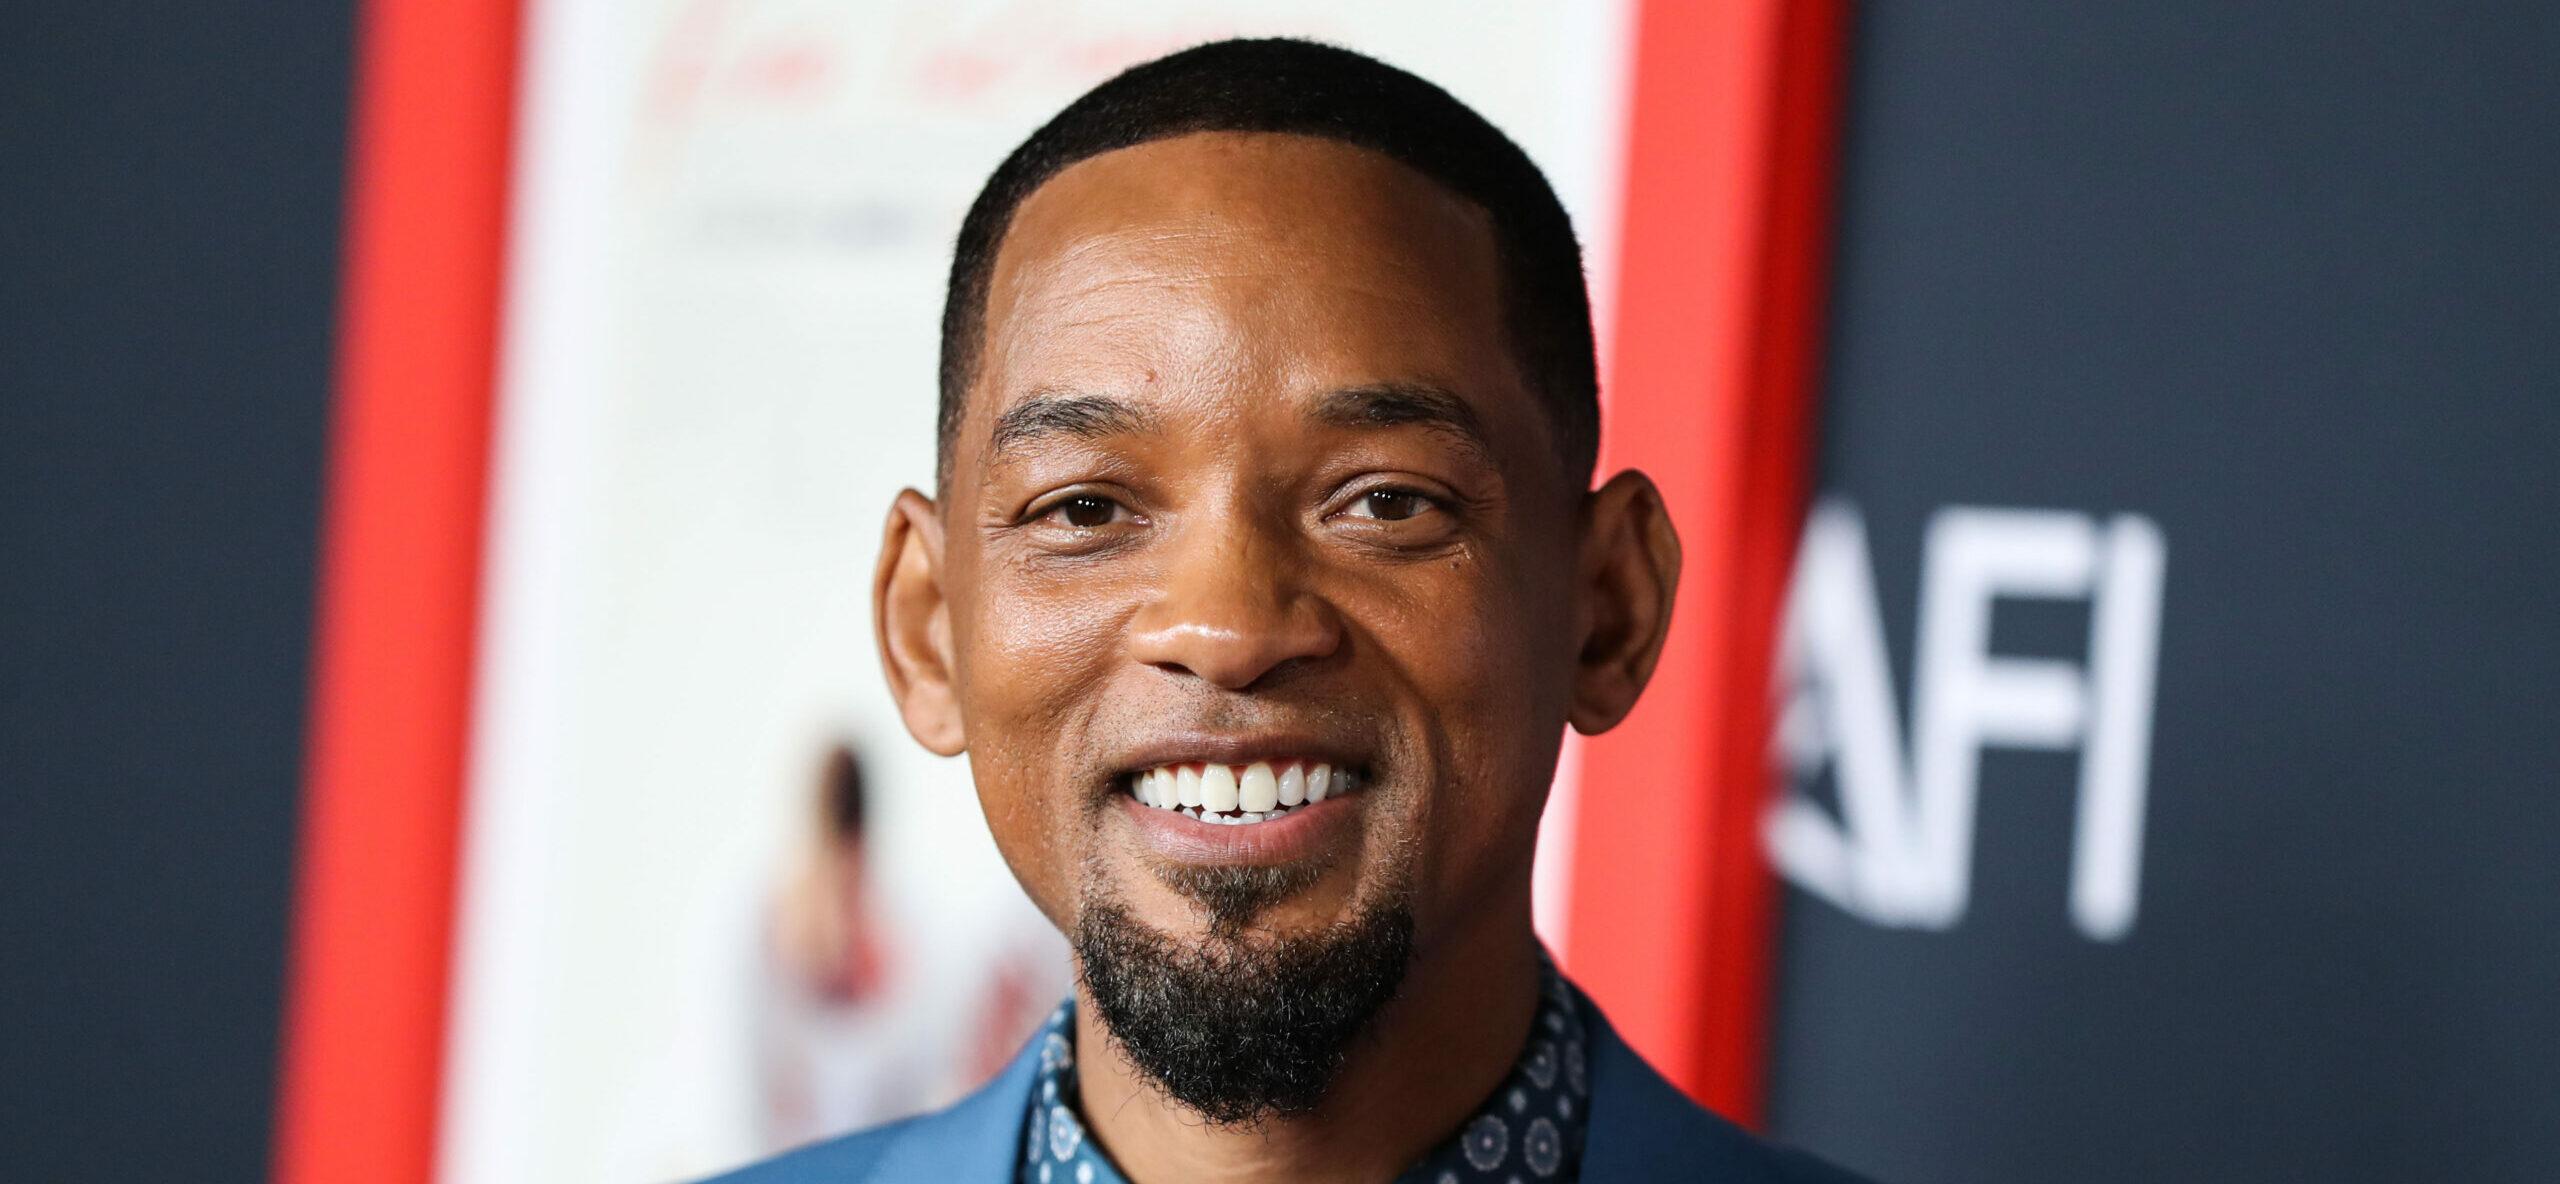 Will Smith arrives at the 2021 AFI Fest